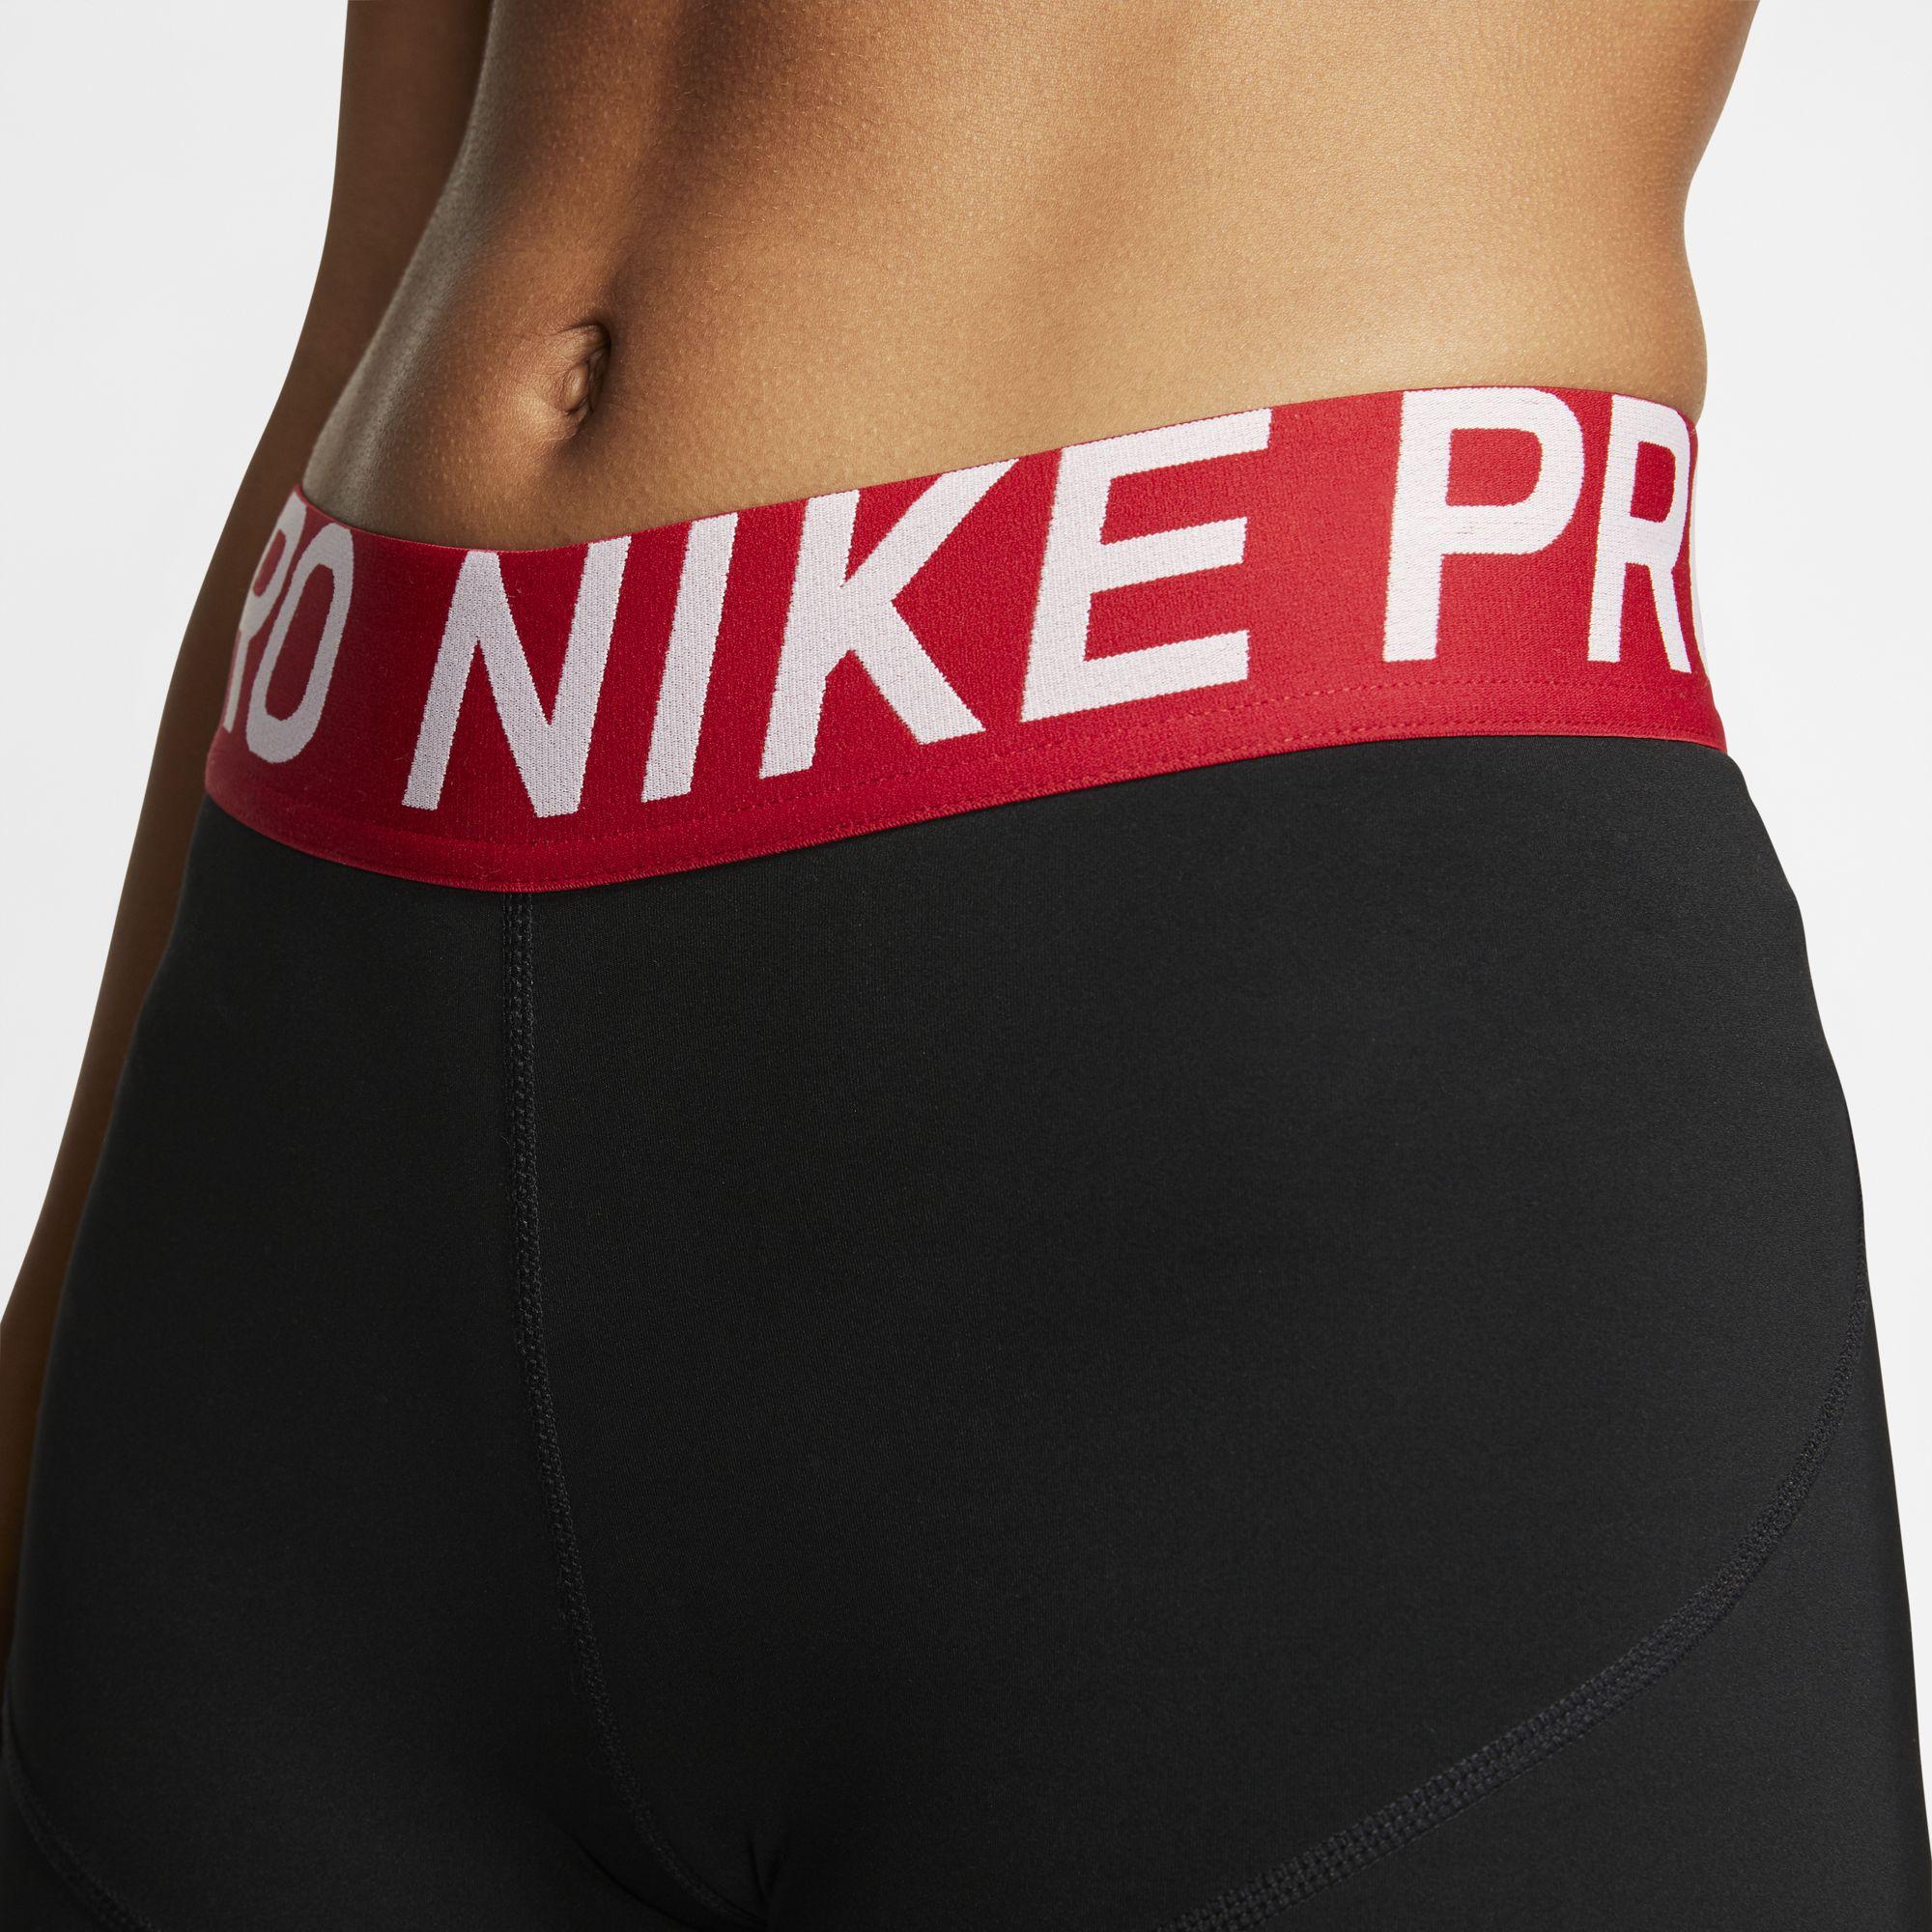 Buy > red nike pro shorts > in stock